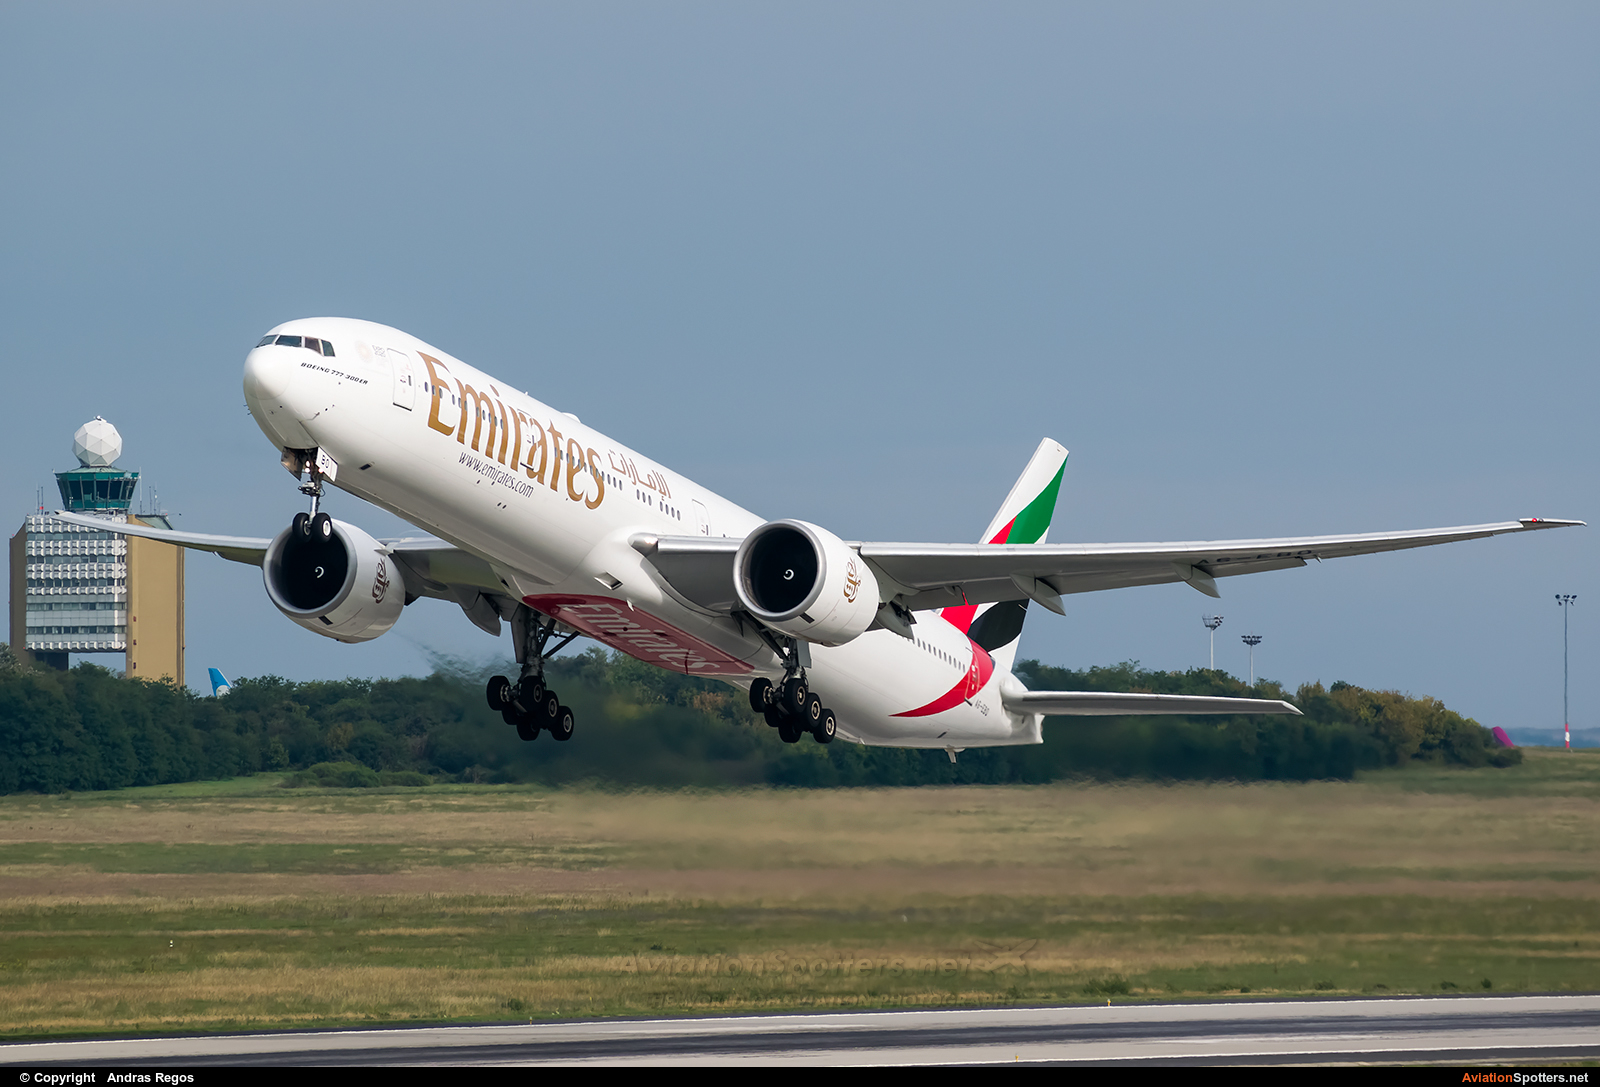 Emirates Airlines  -  777-300ER  (A6-EBO) By Andras Regos (regos)